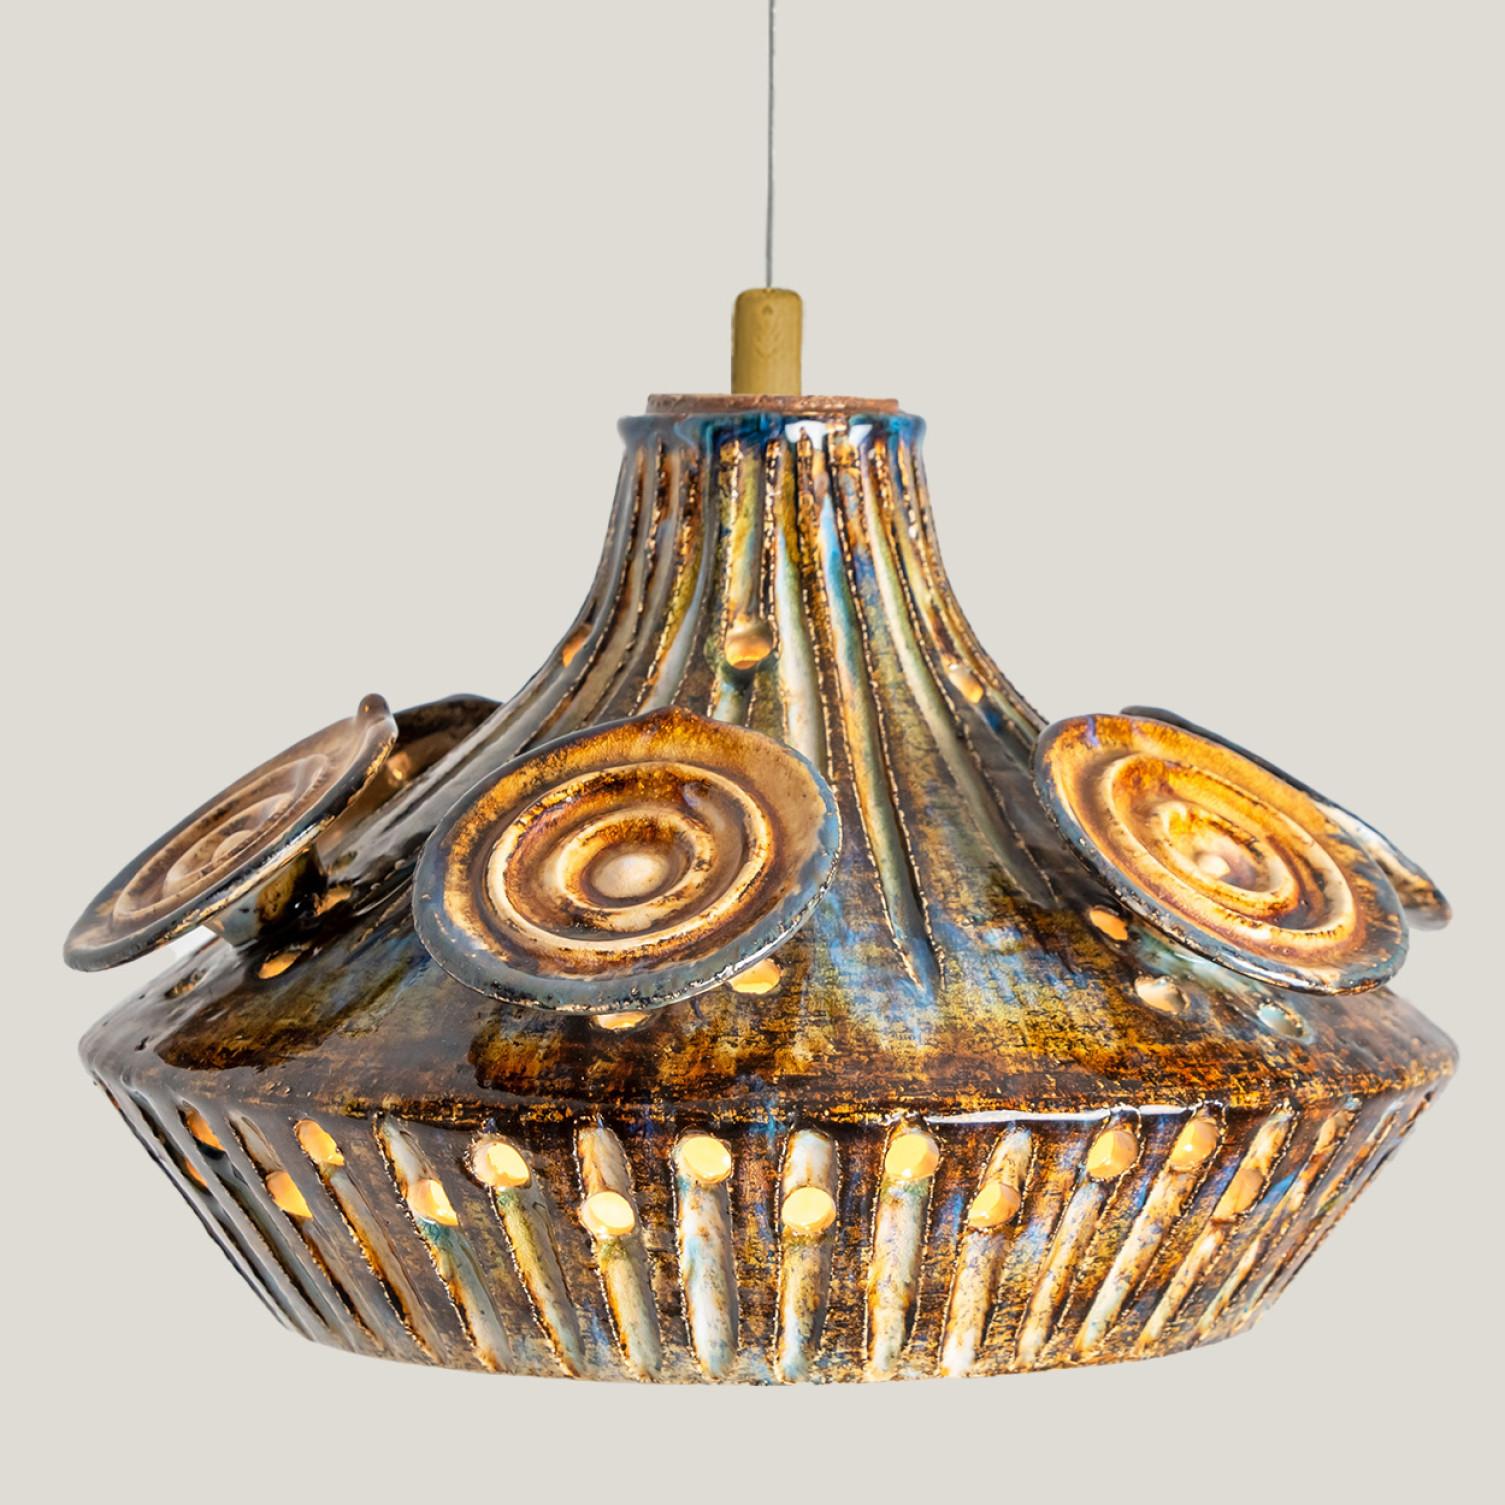 Stunning round hanging lamp with an unusual shape, made with rich grey cognac  brown colored ceramics, manufactured in the 1970s in Denmark. We also have a multitude of unique colored ceramic light sets and arrangements, all available on our